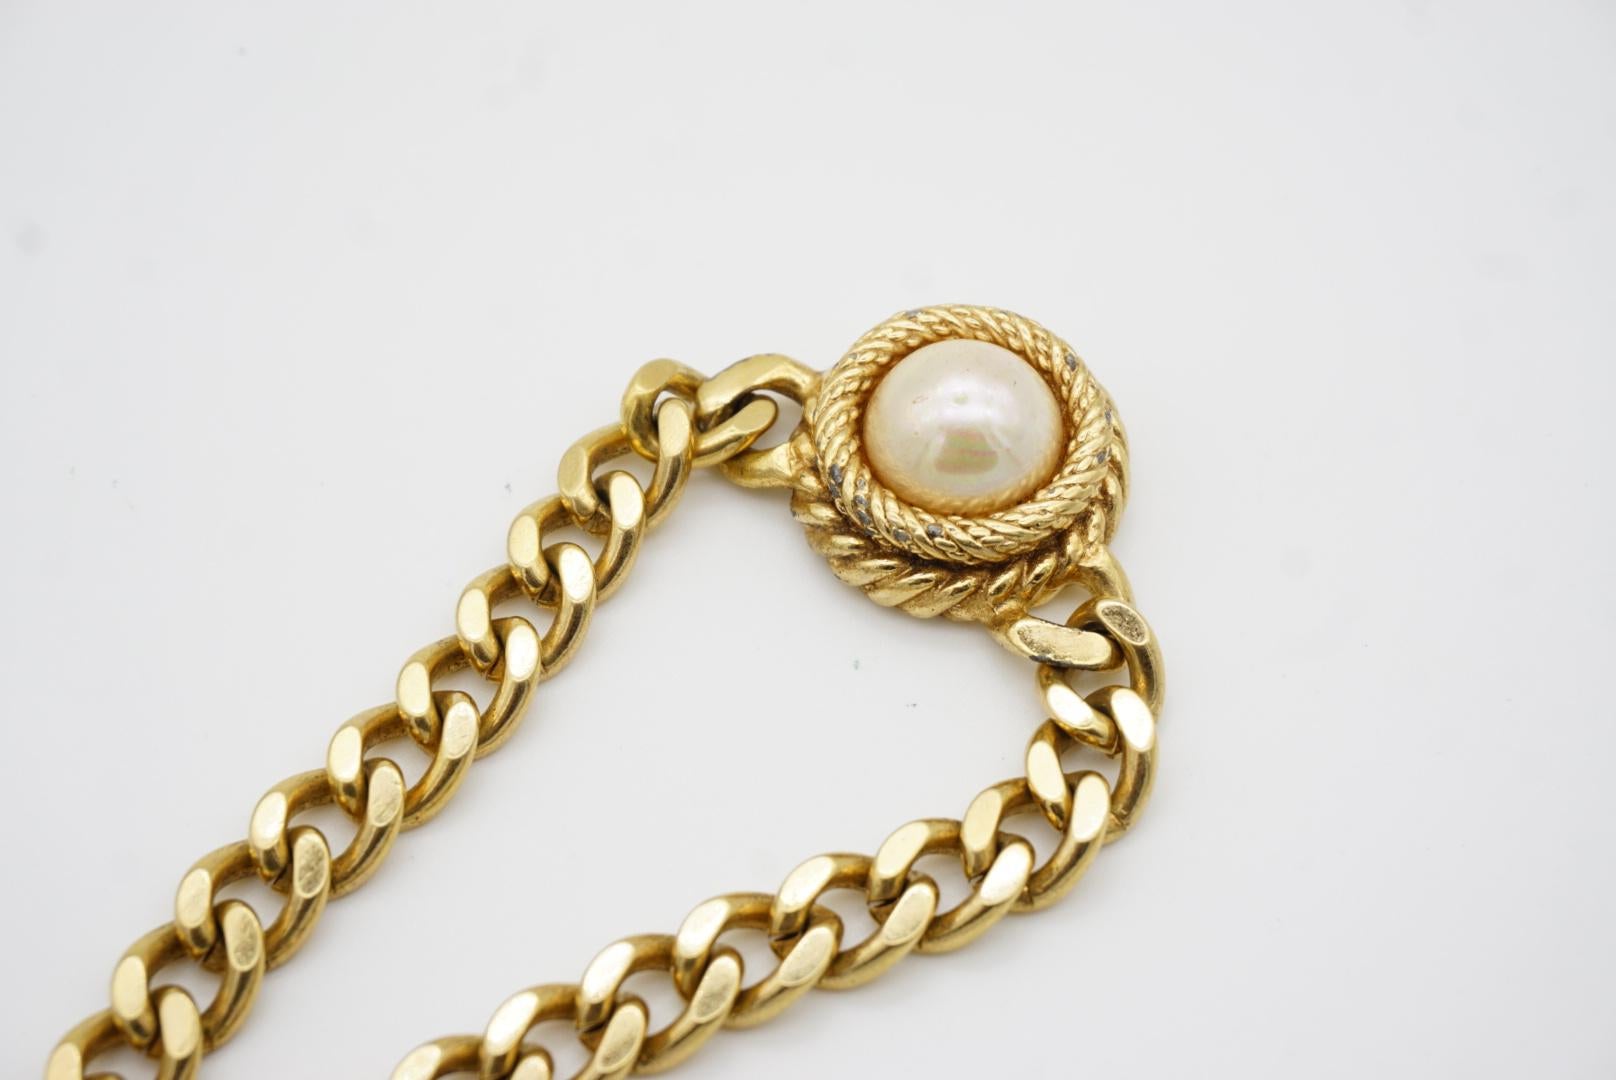 Christian Dior Vintage 1980s White Pearl Cabochon Pendant Curb Link Necklace For Sale 6